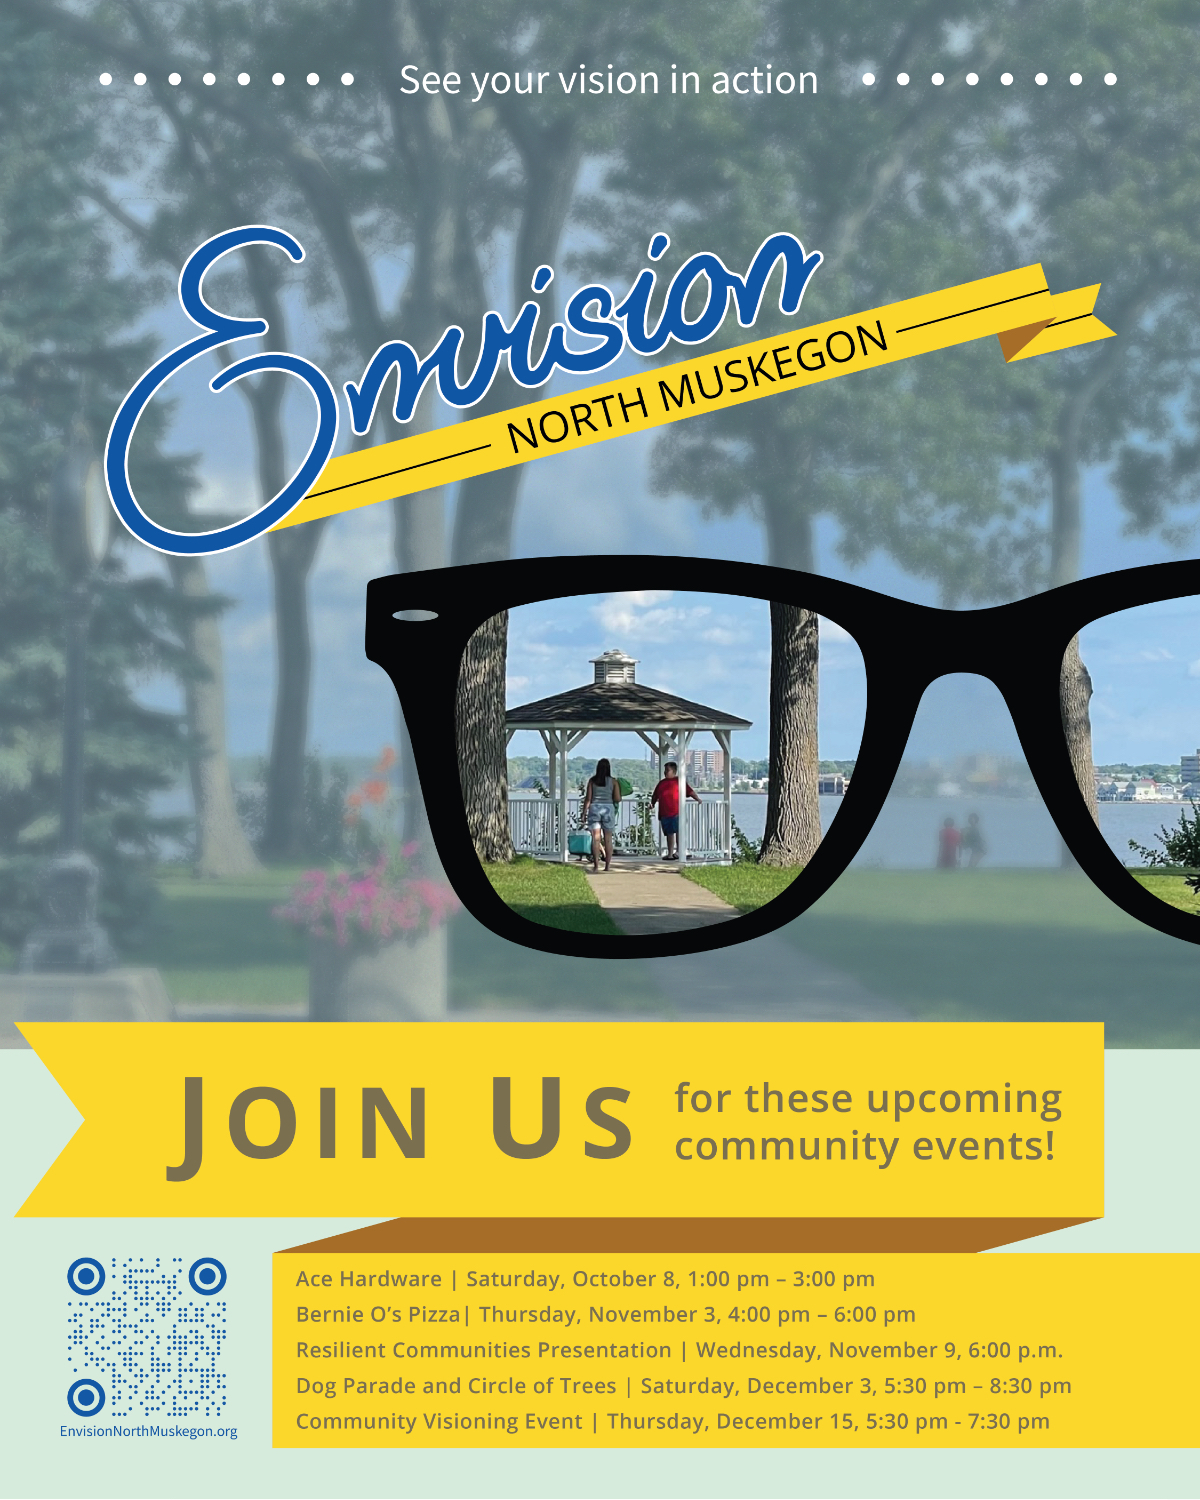 Envision North Muskegon - Join us for these upcoming community events!